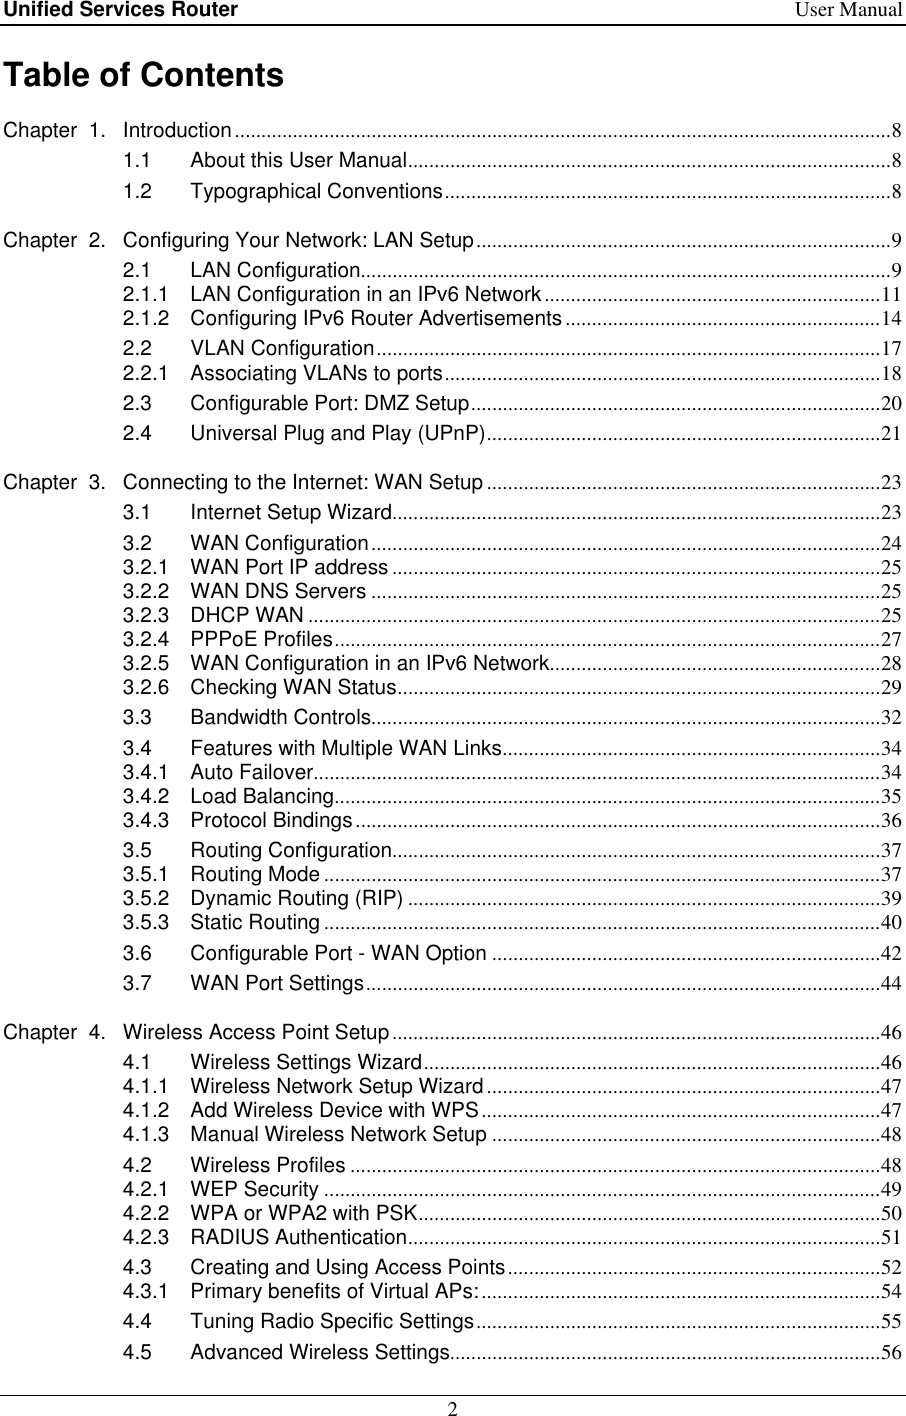 Unified Services Router    User Manual 2  Table of Contents Chapter  1. Introduction ............................................................................................................................. 8 1.1 About this User Manual ............................................................................................ 8 1.2 Typographical Conventions ..................................................................................... 8 Chapter  2. Configuring Your Network: LAN Setup ............................................................................... 9 2.1 LAN Configuration ..................................................................................................... 9 2.1.1 LAN Configuration in an IPv6 Network ................................................................ 11 2.1.2 Configuring IPv6 Router Advertisements ............................................................ 14 2.2 VLAN Configuration ................................................................................................ 17 2.2.1 Associating VLANs to ports ................................................................................... 18 2.3 Configurable Port: DMZ Setup .............................................................................. 20 2.4 Universal Plug and Play (UPnP) ........................................................................... 21 Chapter  3. Connecting to the Internet: WAN Setup ........................................................................... 23 3.1 Internet Setup Wizard ............................................................................................. 23 3.2 WAN Configuration ................................................................................................. 24 3.2.1 WAN Port IP address ............................................................................................. 25 3.2.2 WAN DNS Servers ................................................................................................. 25 3.2.3 DHCP WAN ............................................................................................................. 25 3.2.4 PPPoE Profiles ........................................................................................................ 27 3.2.5 WAN Configuration in an IPv6 Network ............................................................... 28 3.2.6 Checking WAN Status ............................................................................................ 29 3.3 Bandwidth Controls ................................................................................................. 32 3.4 Features with Multiple WAN Links ........................................................................ 34 3.4.1 Auto Failover ............................................................................................................ 34 3.4.2 Load Balancing ........................................................................................................ 35 3.4.3 Protocol Bindings .................................................................................................... 36 3.5 Routing Configuration ............................................................................................. 37 3.5.1 Routing Mode .......................................................................................................... 37 3.5.2 Dynamic Routing (RIP) .......................................................................................... 39 3.5.3 Static Routing .......................................................................................................... 40 3.6 Configurable Port - WAN Option .......................................................................... 42 3.7 WAN Port Settings .................................................................................................. 44 Chapter  4. Wireless Access Point Setup ............................................................................................. 46 4.1 Wireless Settings Wizard ....................................................................................... 46 4.1.1 Wireless Network Setup Wizard ........................................................................... 47 4.1.2 Add Wireless Device with WPS ............................................................................ 47 4.1.3 Manual Wireless Network Setup .......................................................................... 48 4.2 Wireless Profiles ..................................................................................................... 48 4.2.1 WEP Security .......................................................................................................... 49 4.2.2 WPA or WPA2 with PSK ........................................................................................ 50 4.2.3 RADIUS Authentication .......................................................................................... 51 4.3 Creating and Using Access Points ....................................................................... 52 4.3.1 Primary benefits of Virtual APs: ............................................................................ 54 4.4 Tuning Radio Specific Settings ............................................................................. 55 4.5 Advanced Wireless Settings .................................................................................. 56 